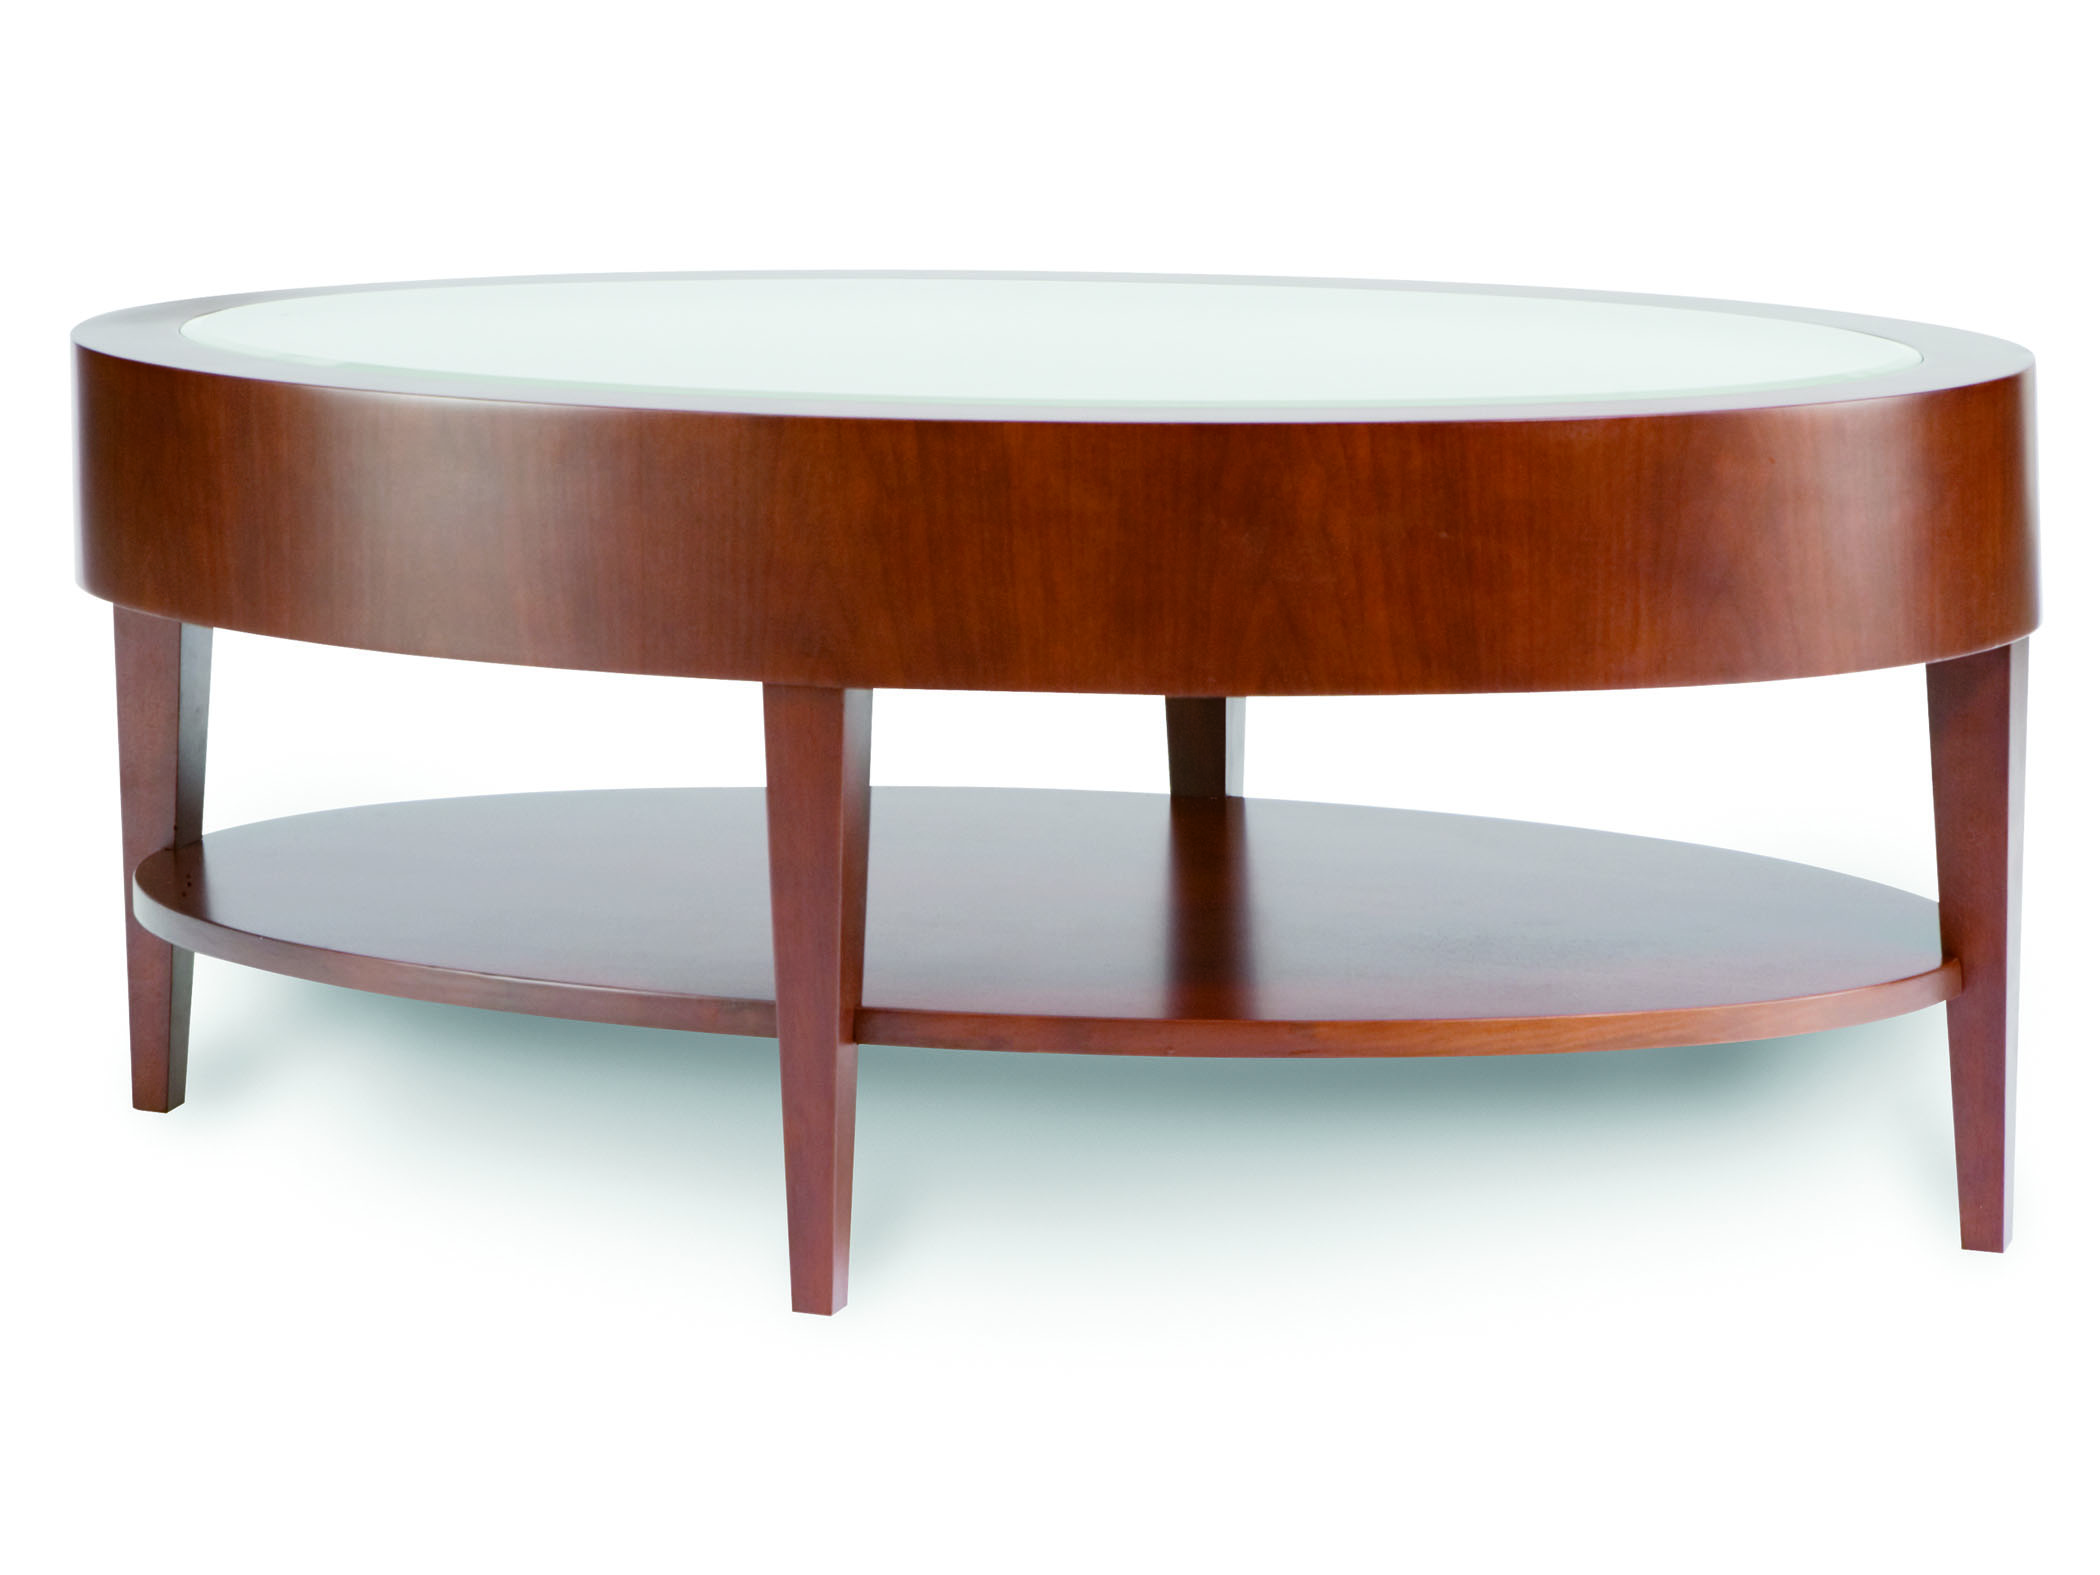 Reception Area Furniture from Compel - Empire table